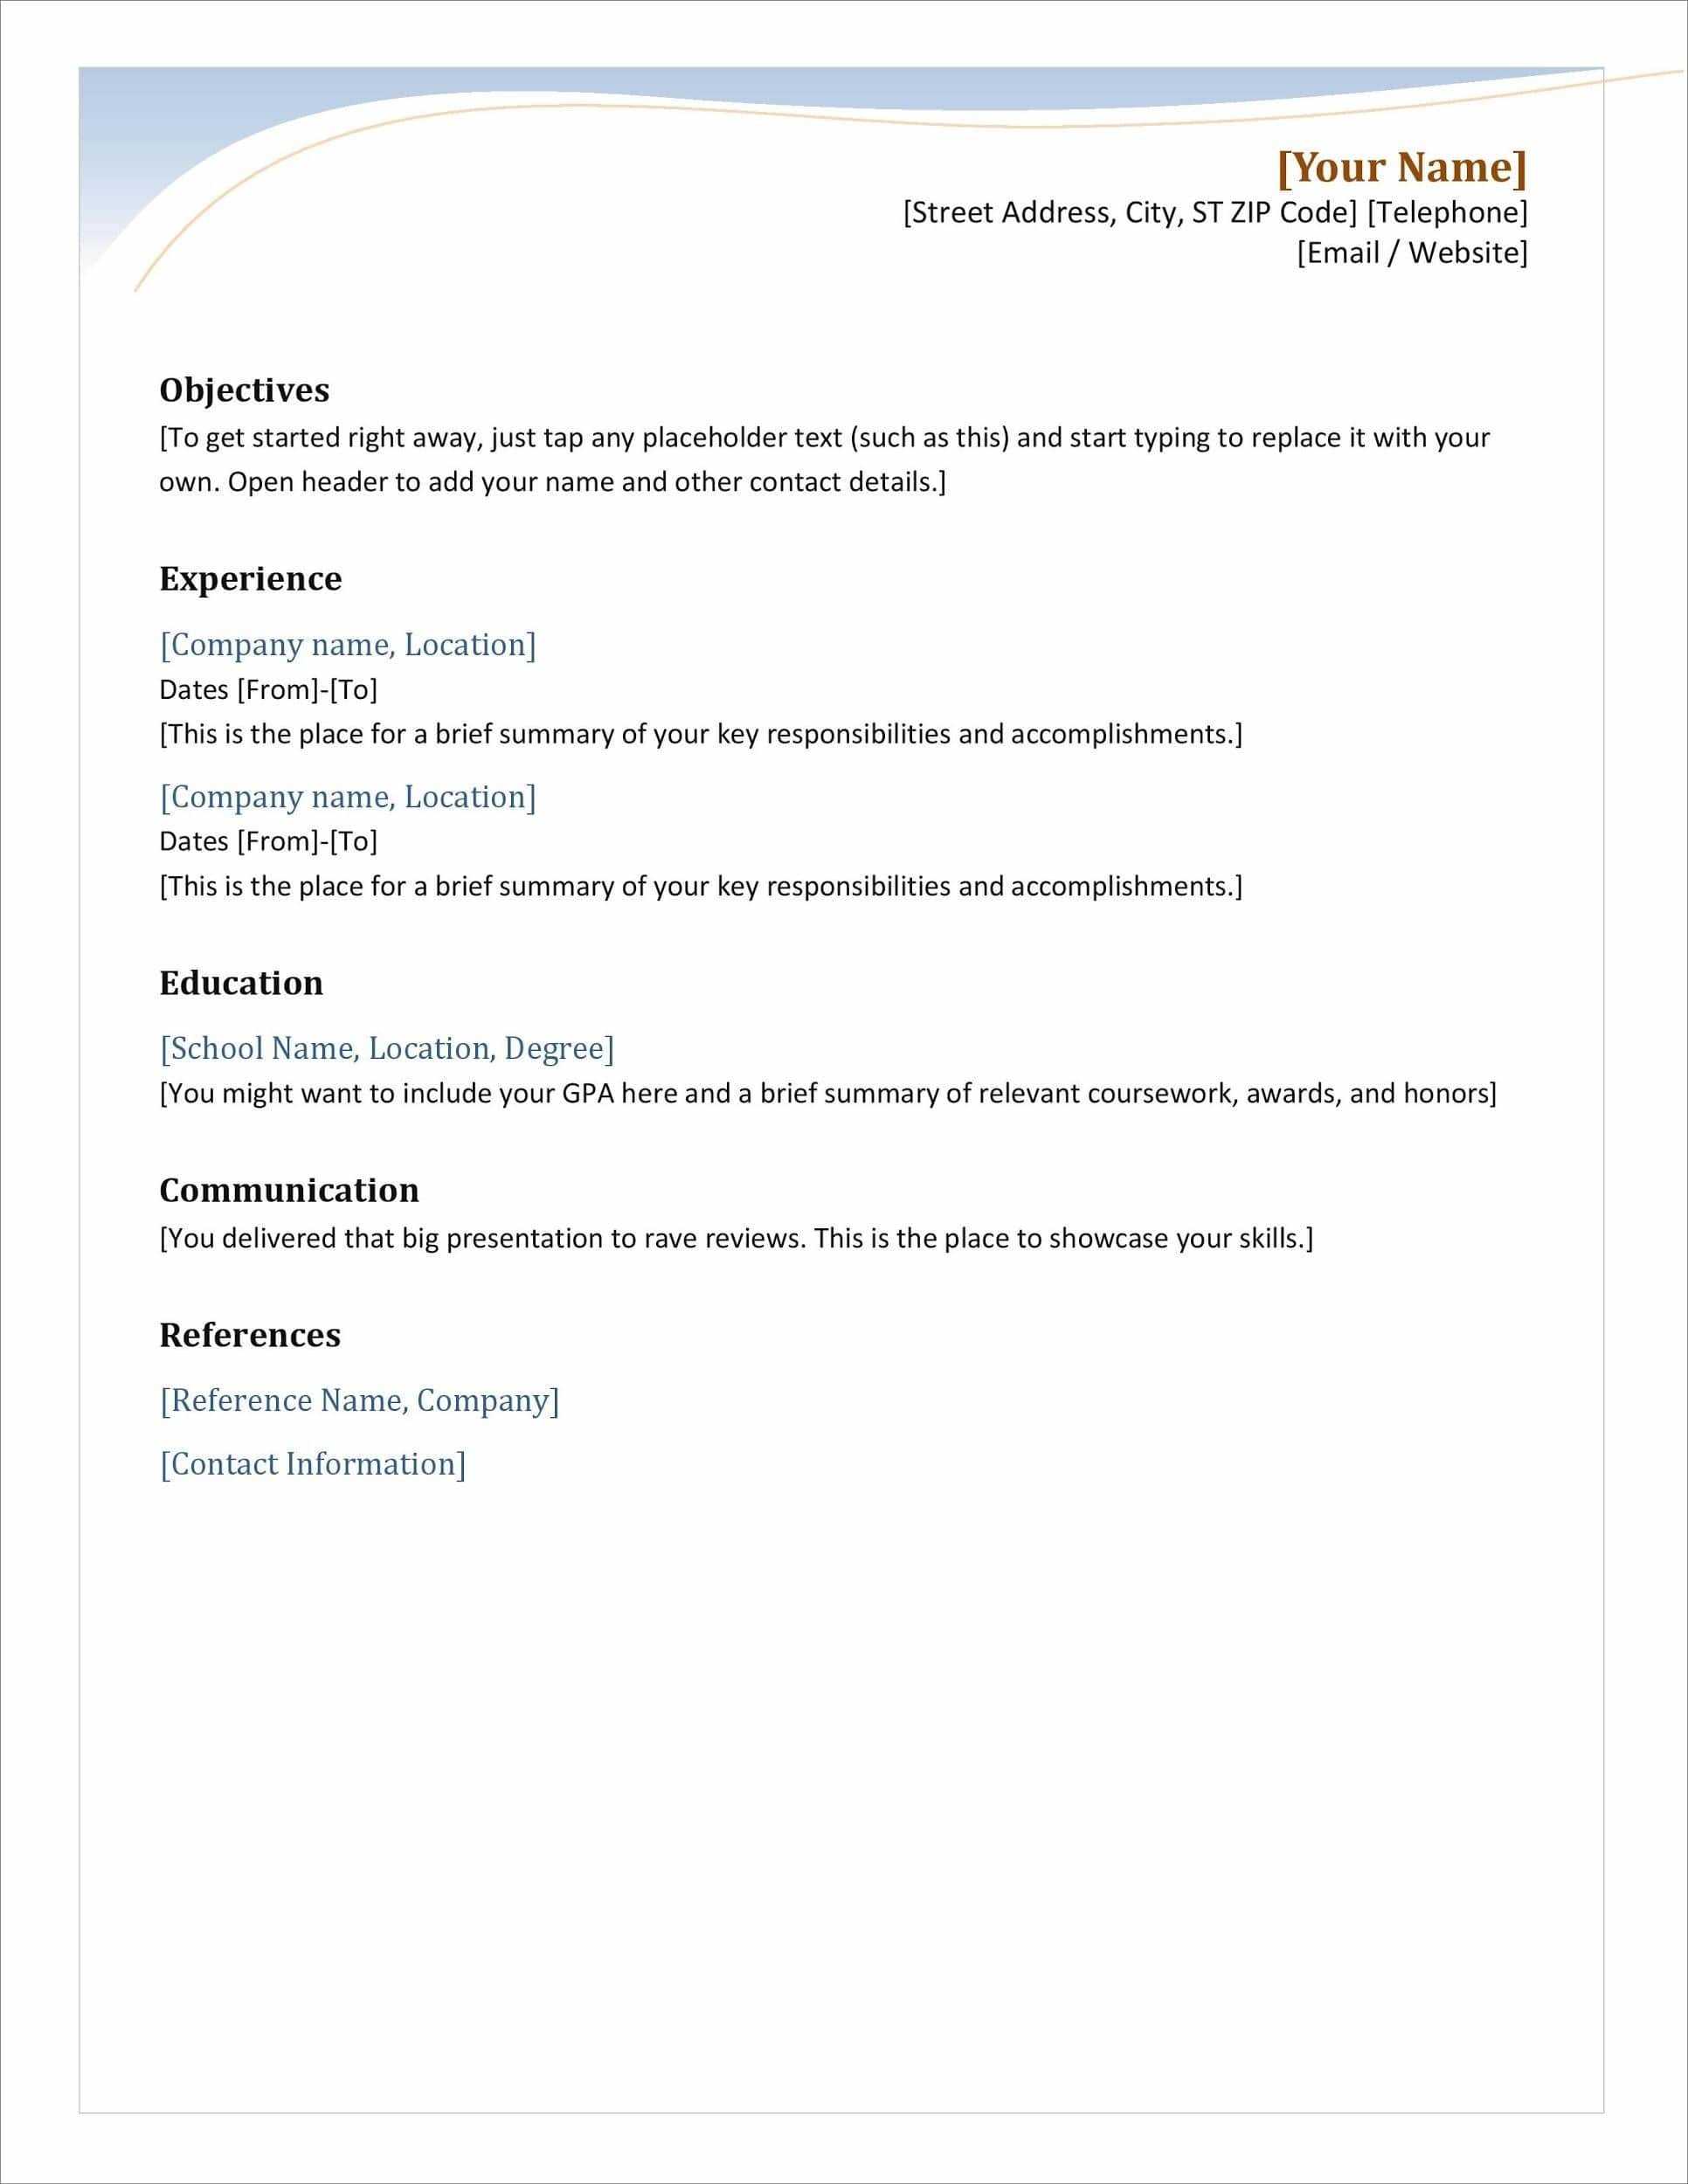 25 Resume Templates For Microsoft Word [Free Download] Regarding How To Find A Resume Template On Word